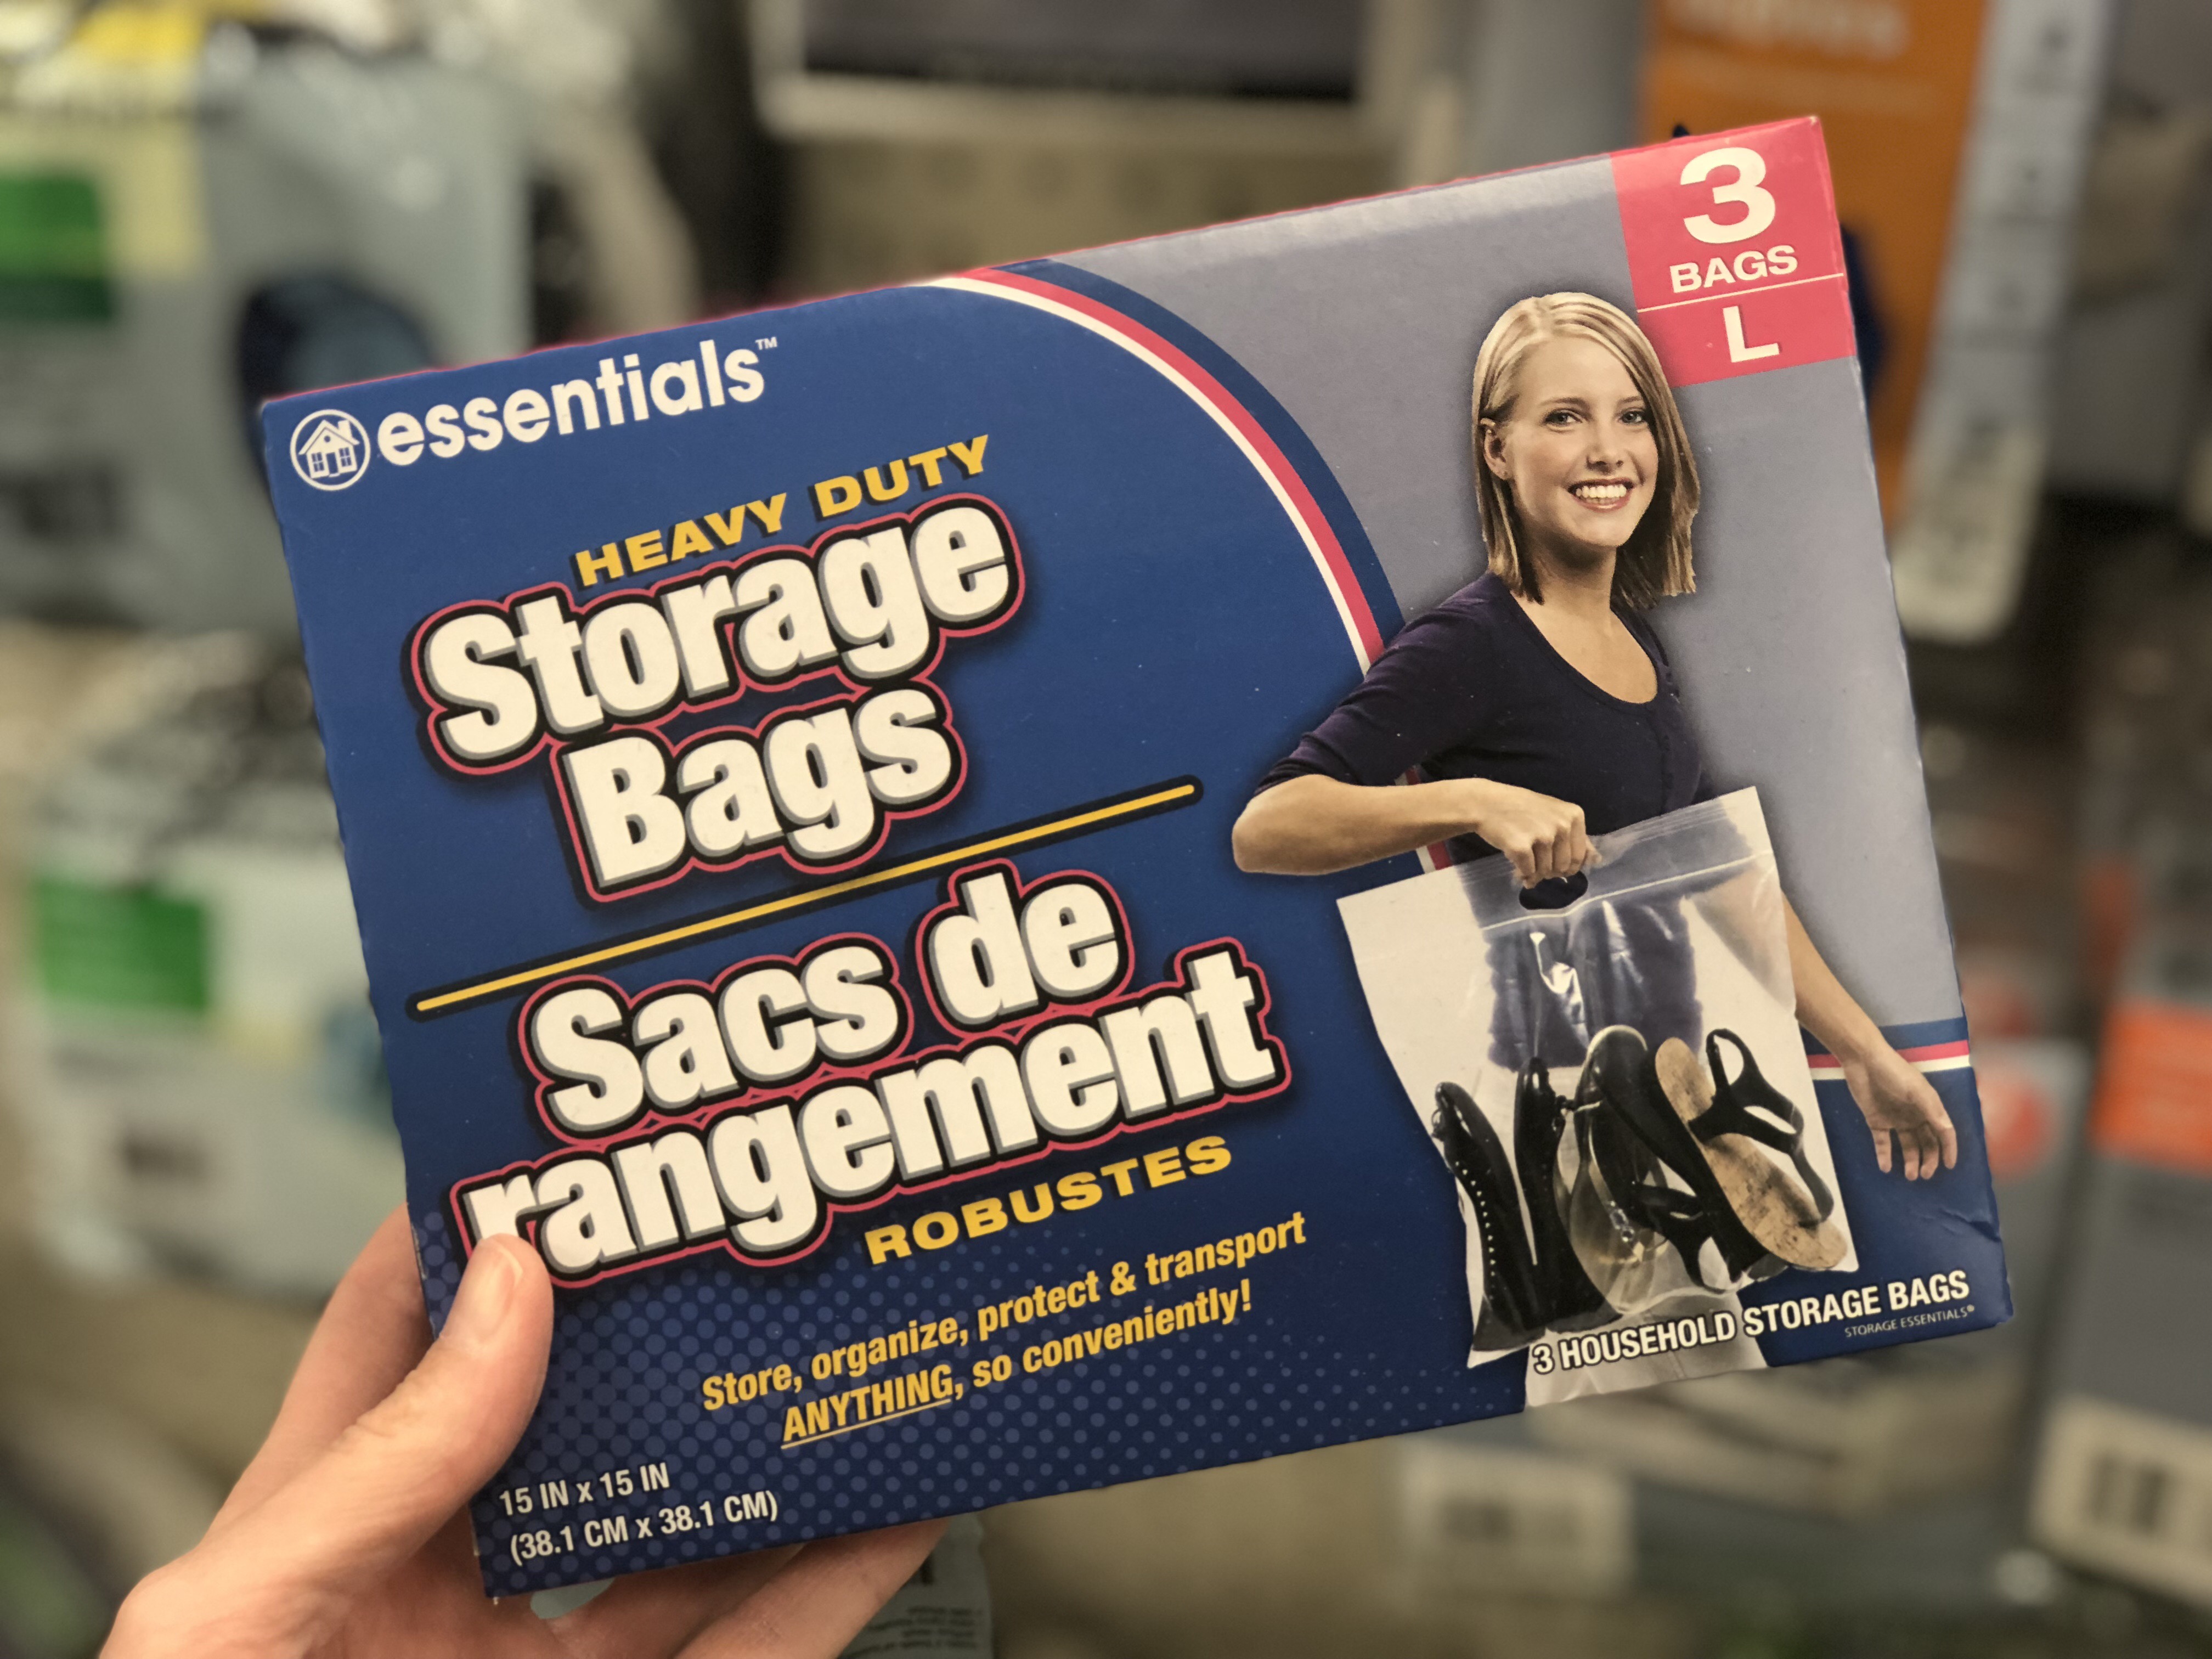 ESSENTIALS HEAVY DUTY STORAGE BAGS WITH HANDLE LOT OF 3PACKS 2 XL BAGS EACH 